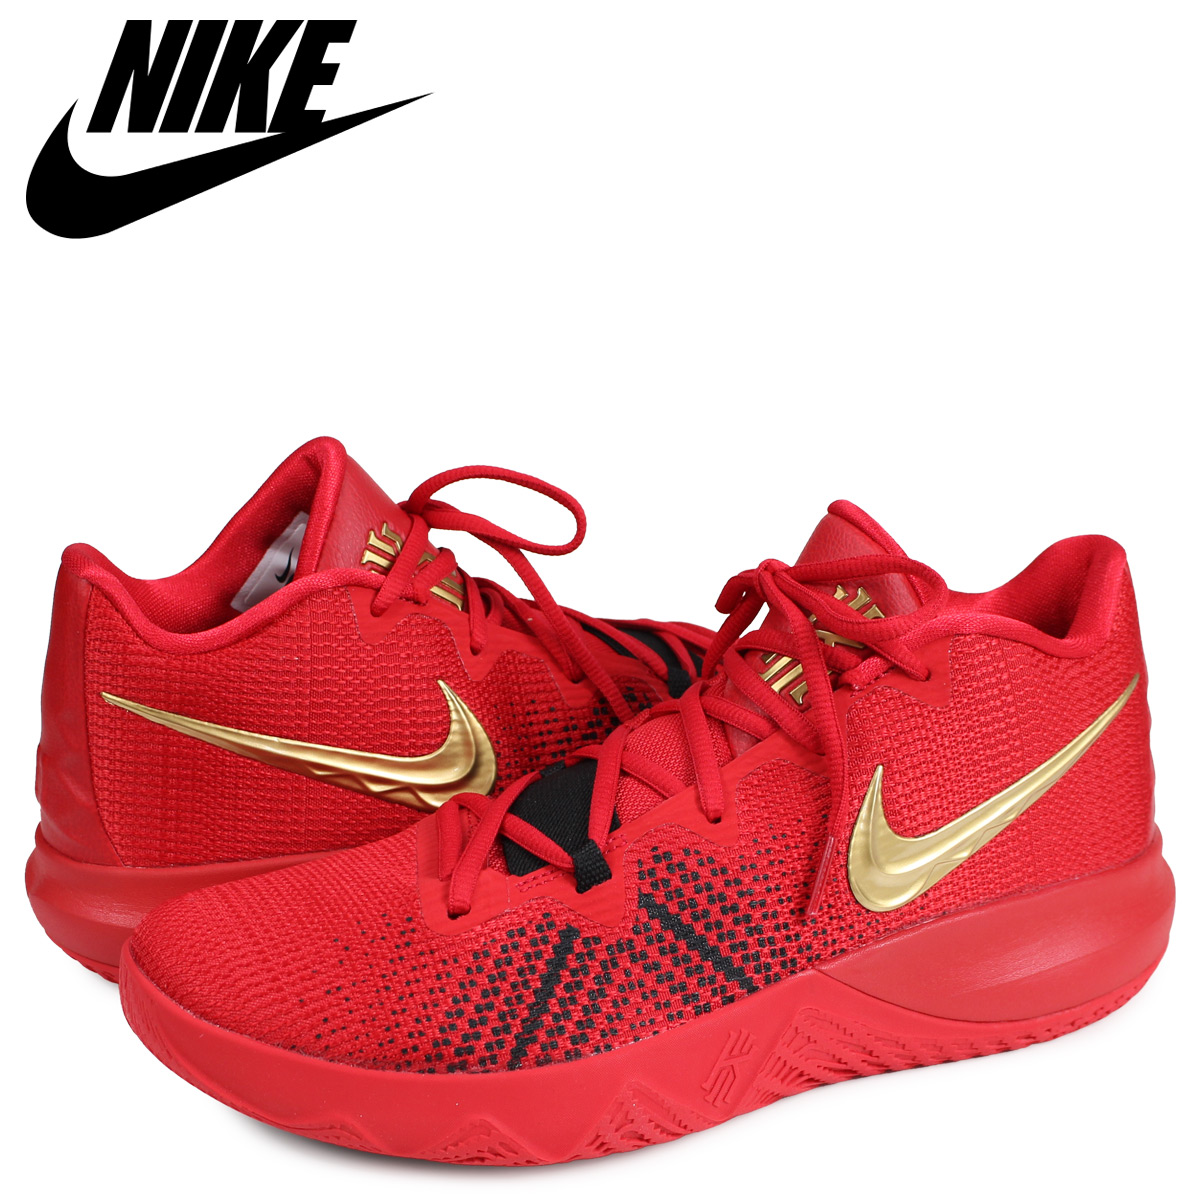 nike kyrie flytrap red and gold cheap 